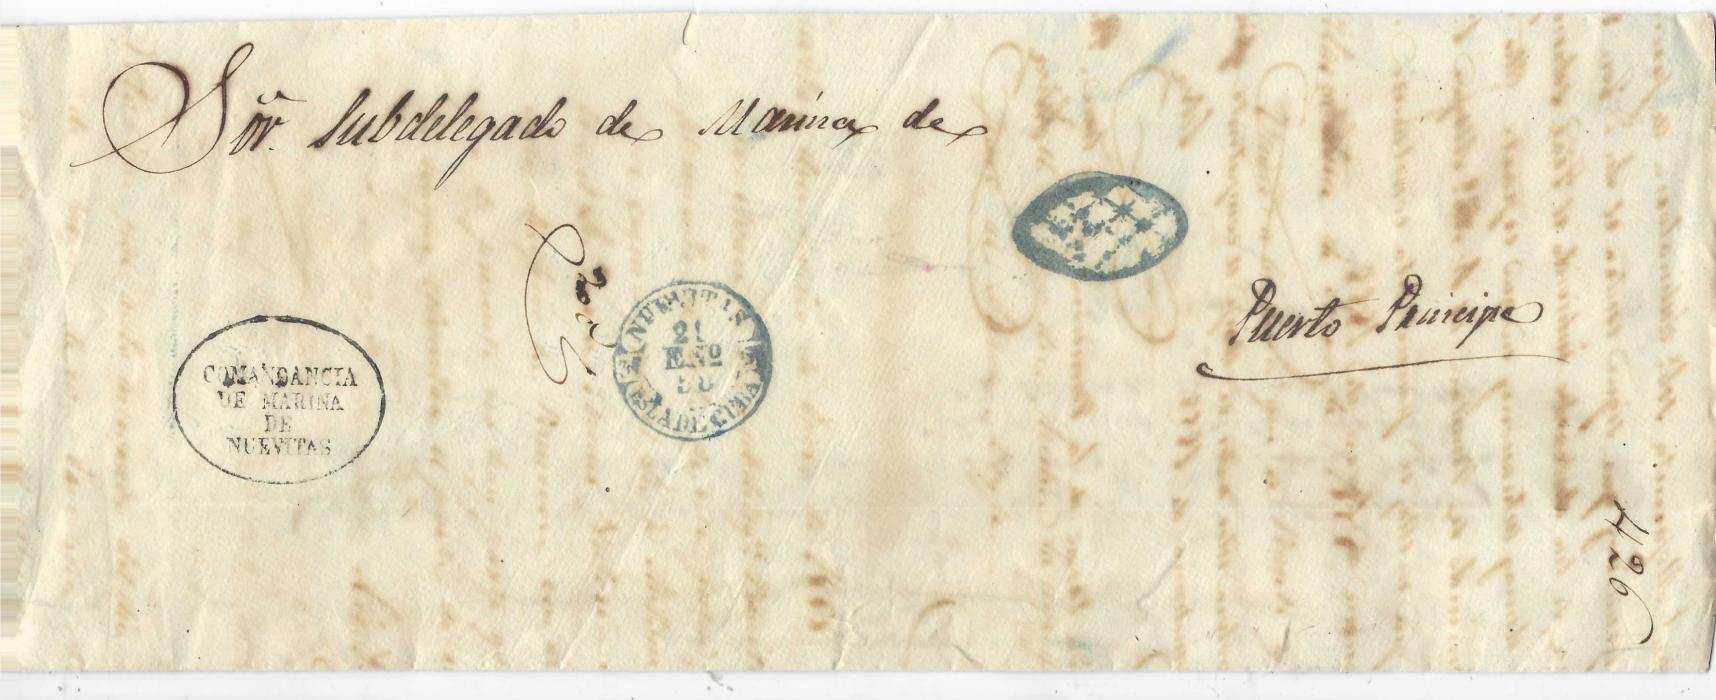 Cuba 1858 large outer letter sheet, 300 x 115mm,from ‘Comandancia/ De Marina/ De/ Nuevitas to Puerto Principe, bearing blue despatch cds and oval grill handstamp with, on reverse, handstamped ‘48’ charge in same ink.